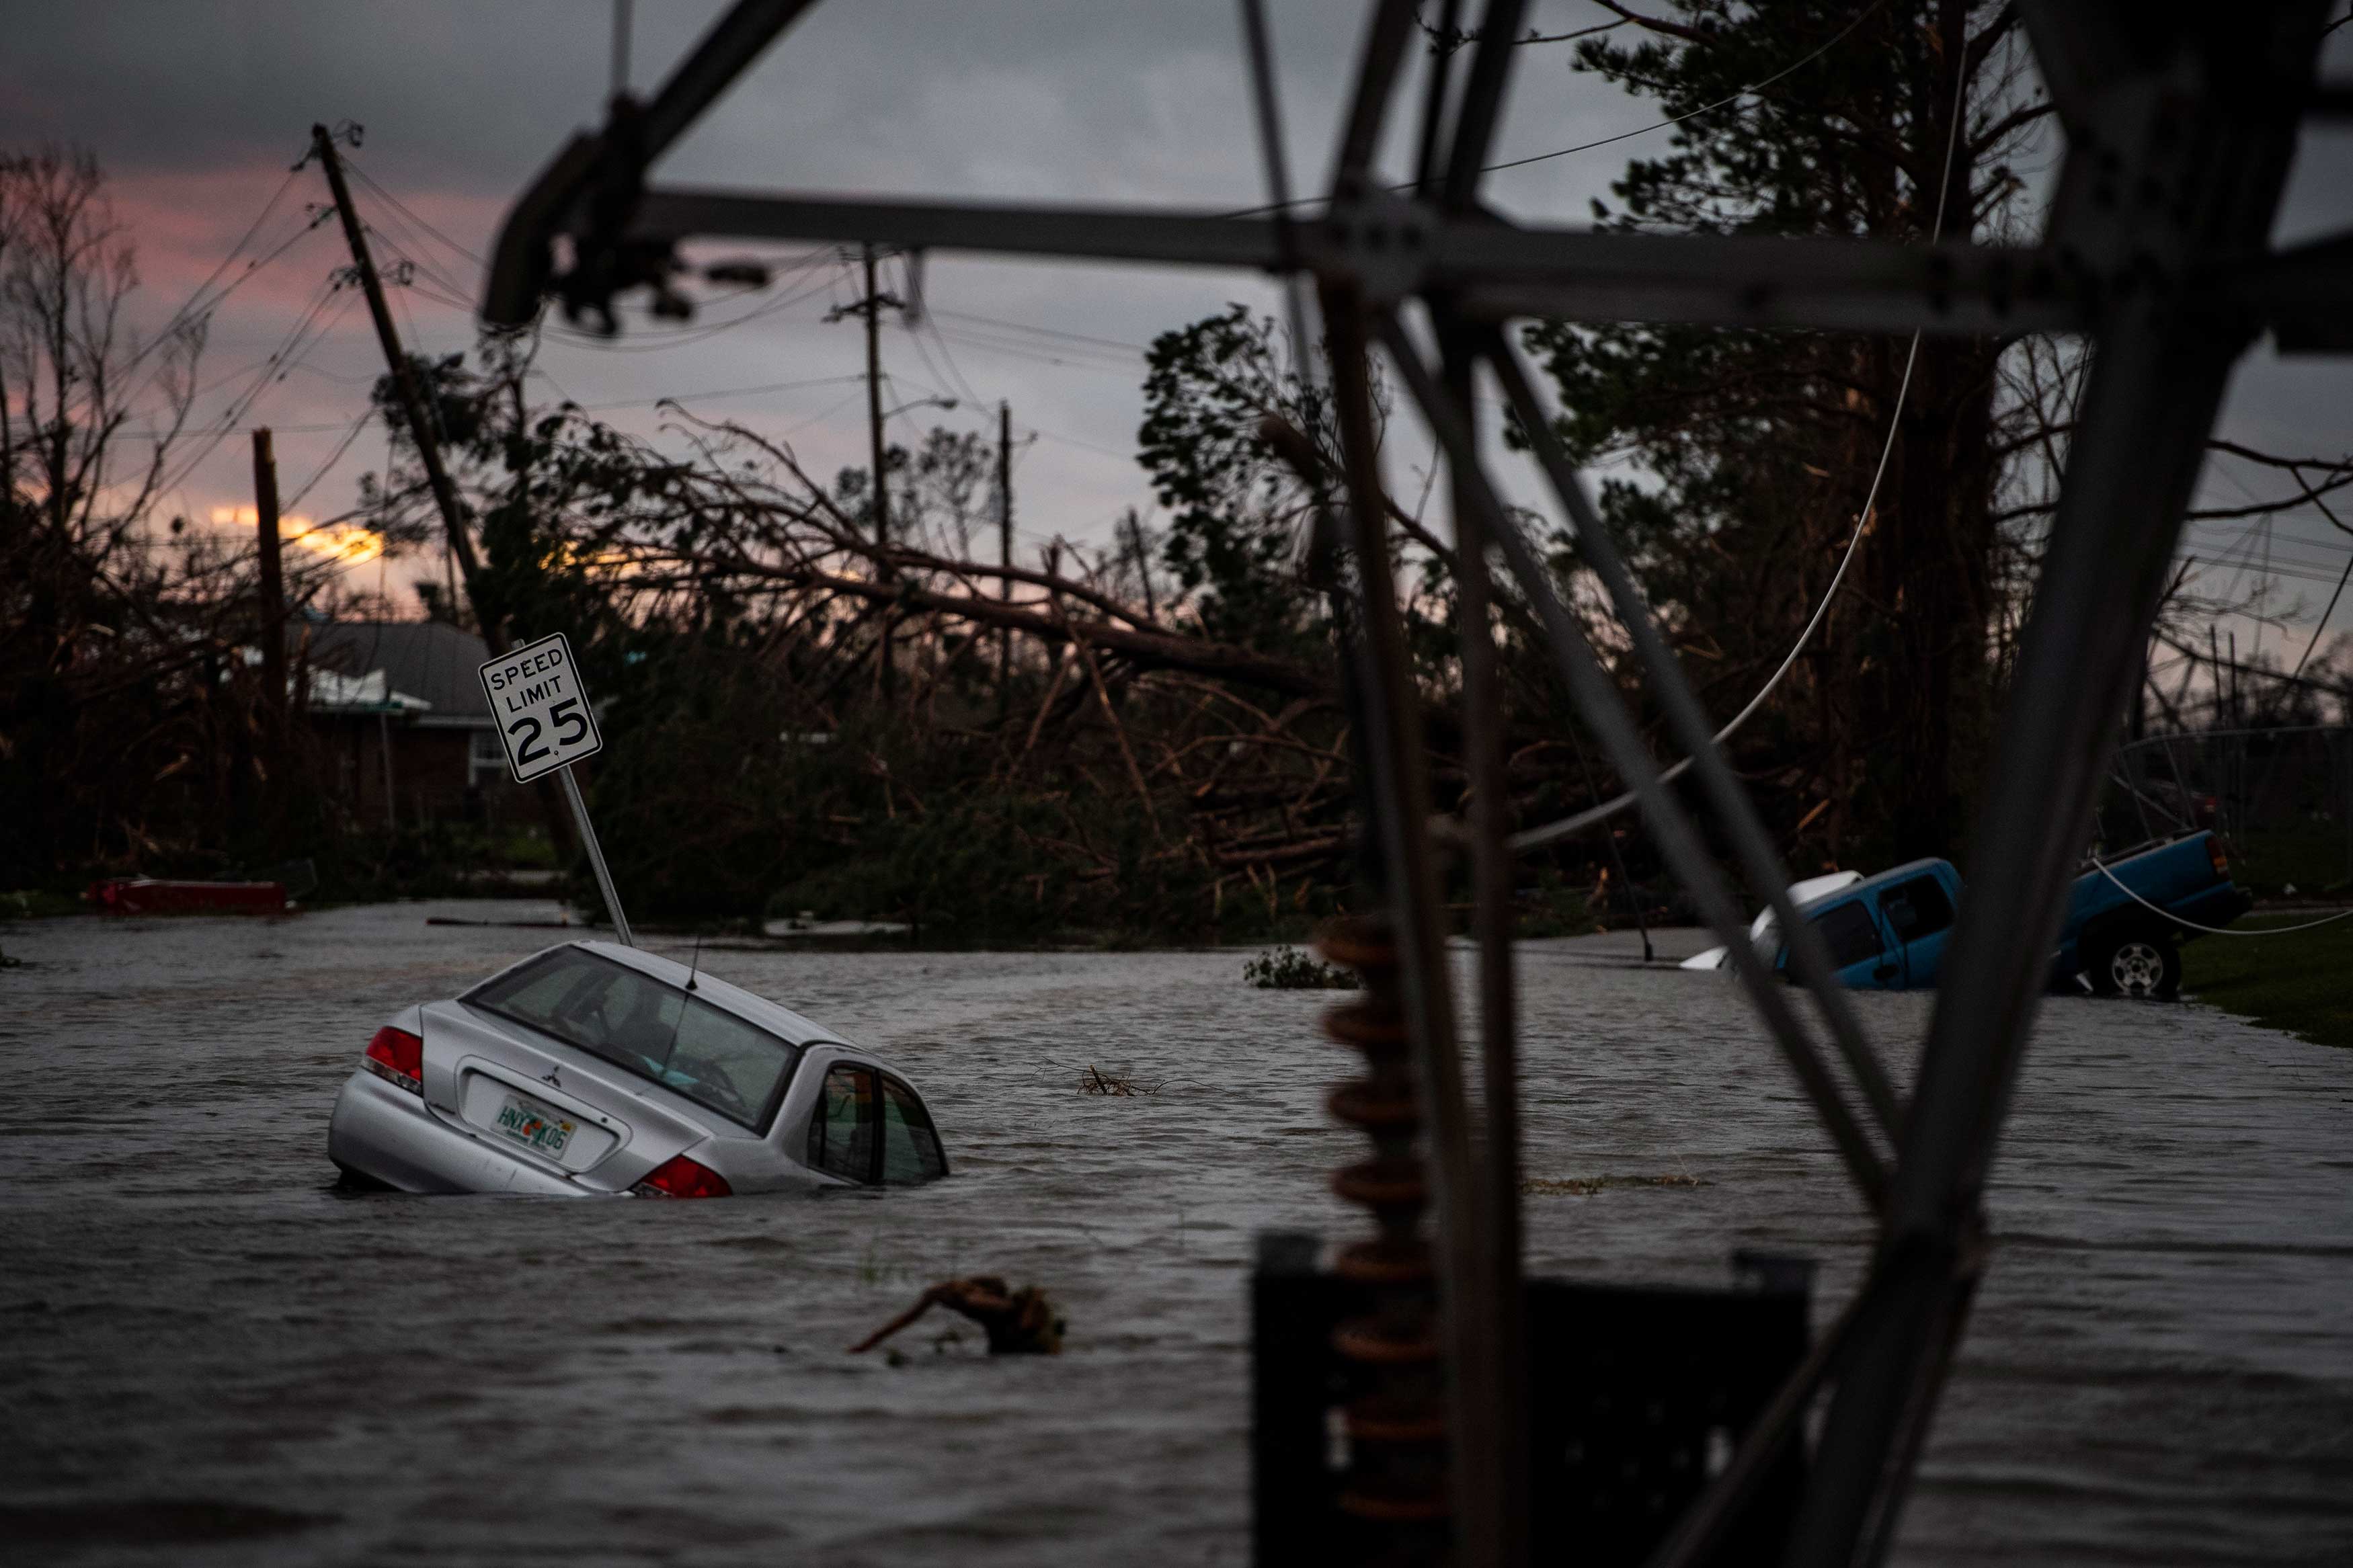 A car is seen caught in flood water after category 4 Hurricane Michael made land fall along the Florida panhandle, on Oct. 10, 2018 in Panama City, Fla. (Jabin Botsford—The Washington Post/Getty Images)